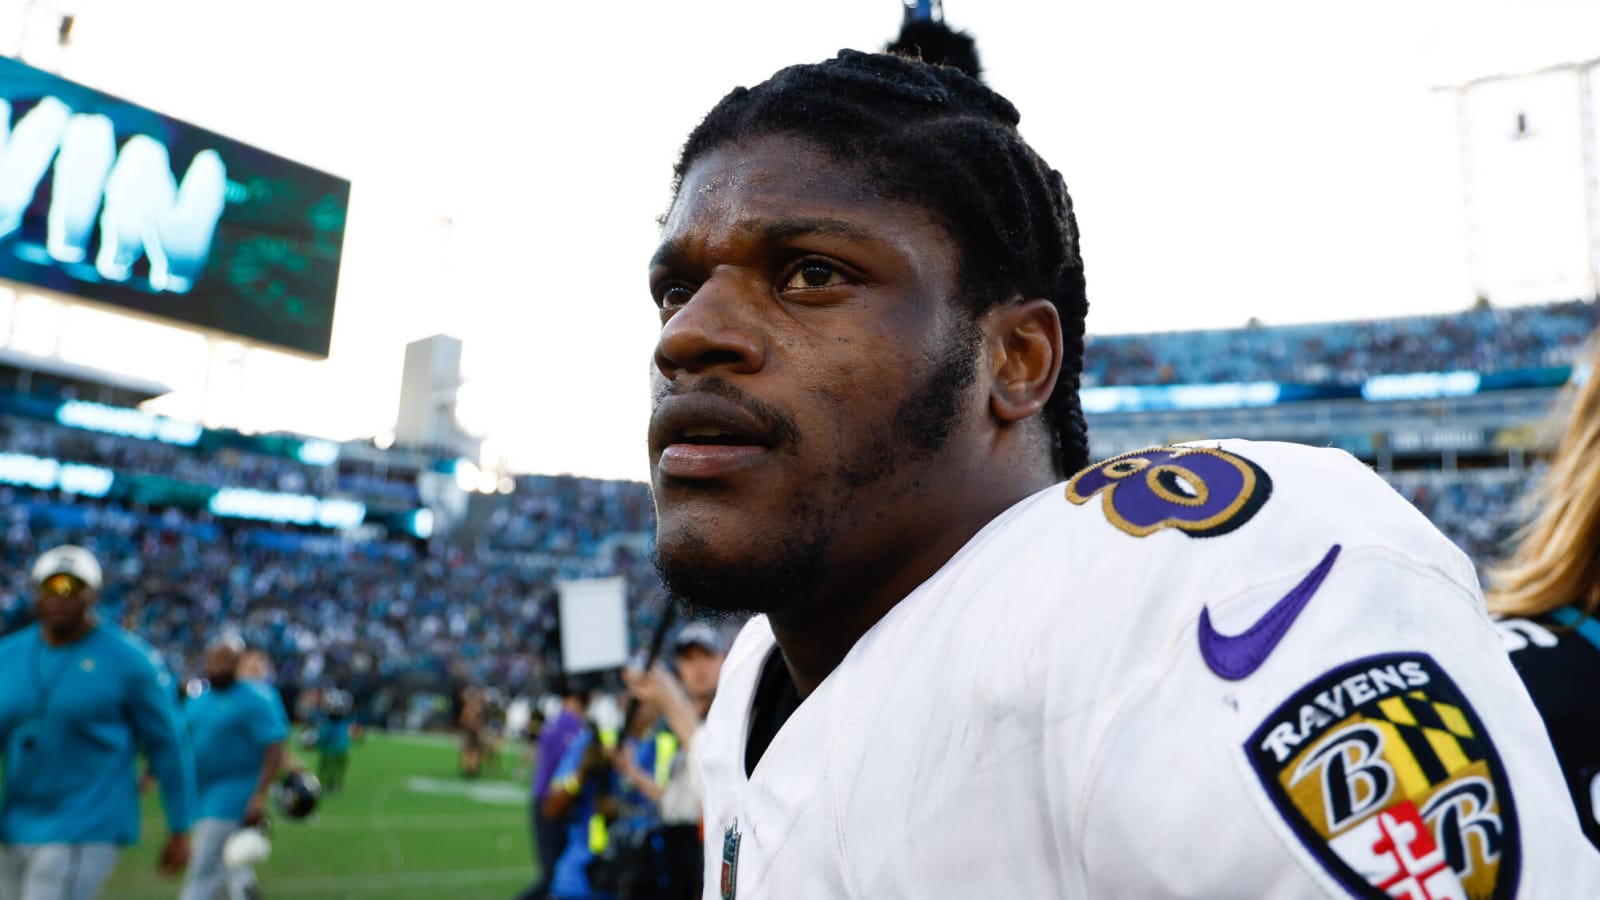 Former Super Bowl champion to Lamar Jackson: 'The Ravens played you'